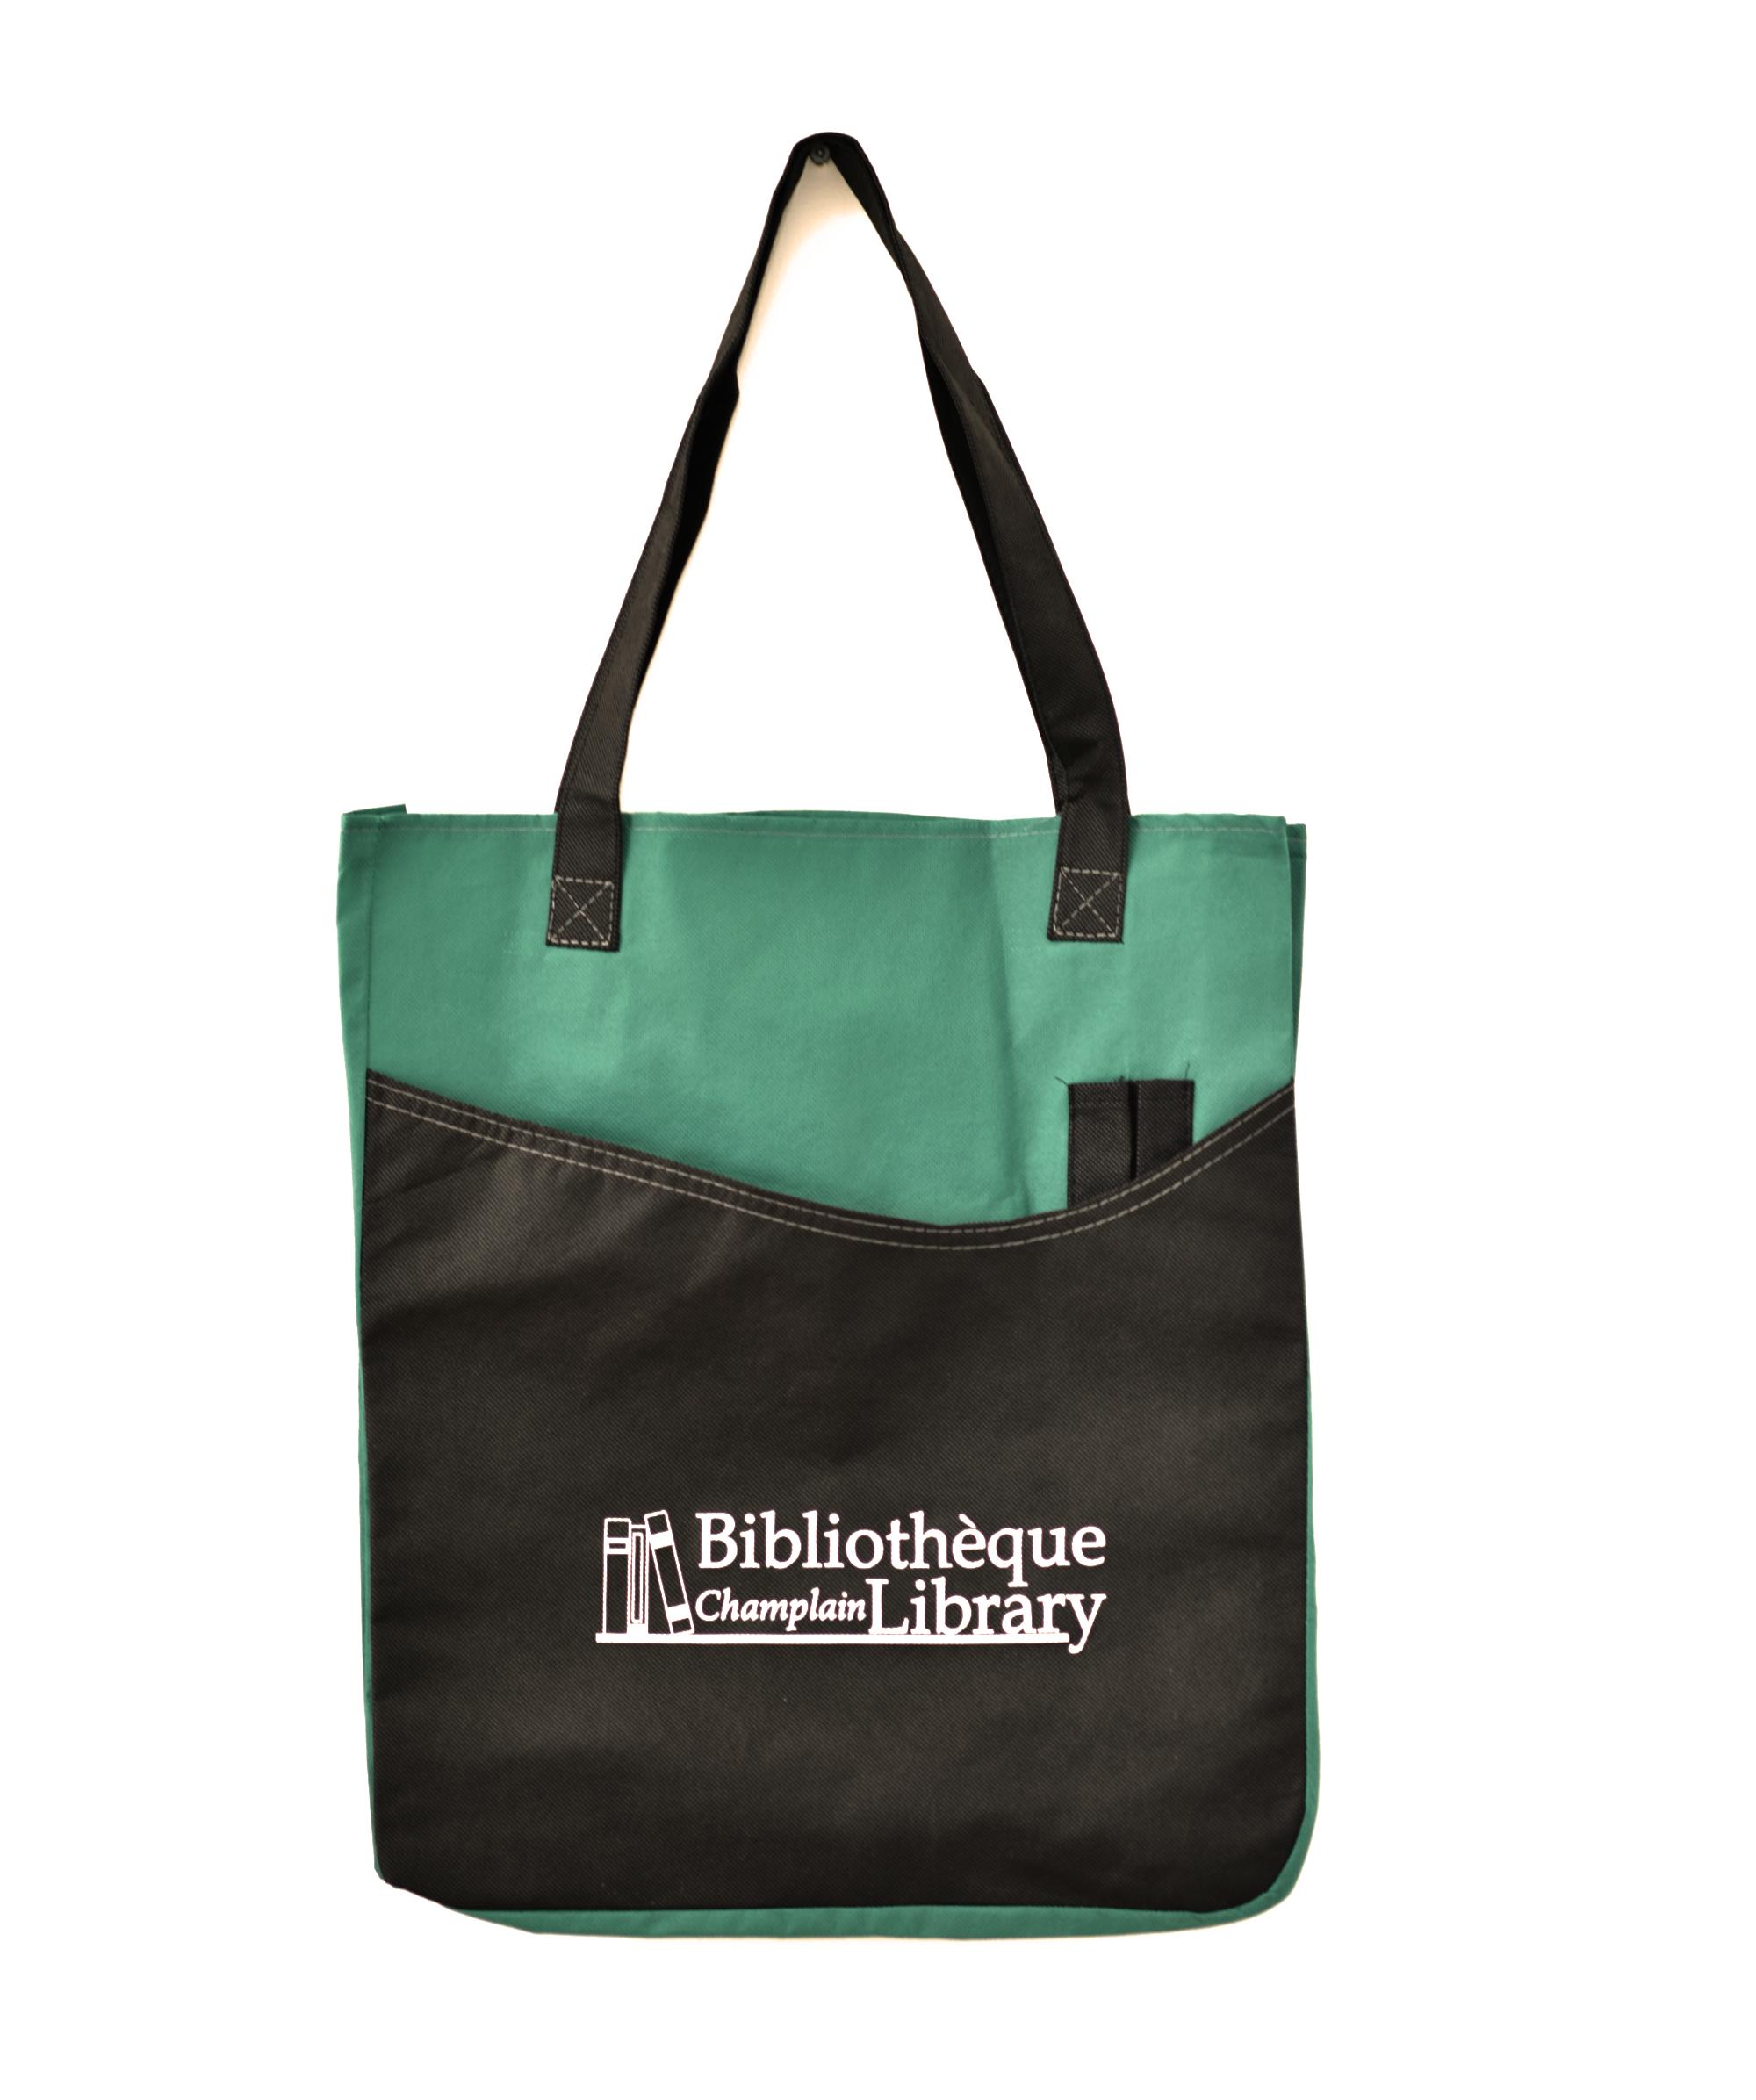 September is Library Card Sign-up Month at the Champlain Library; sign up and get a free bag!